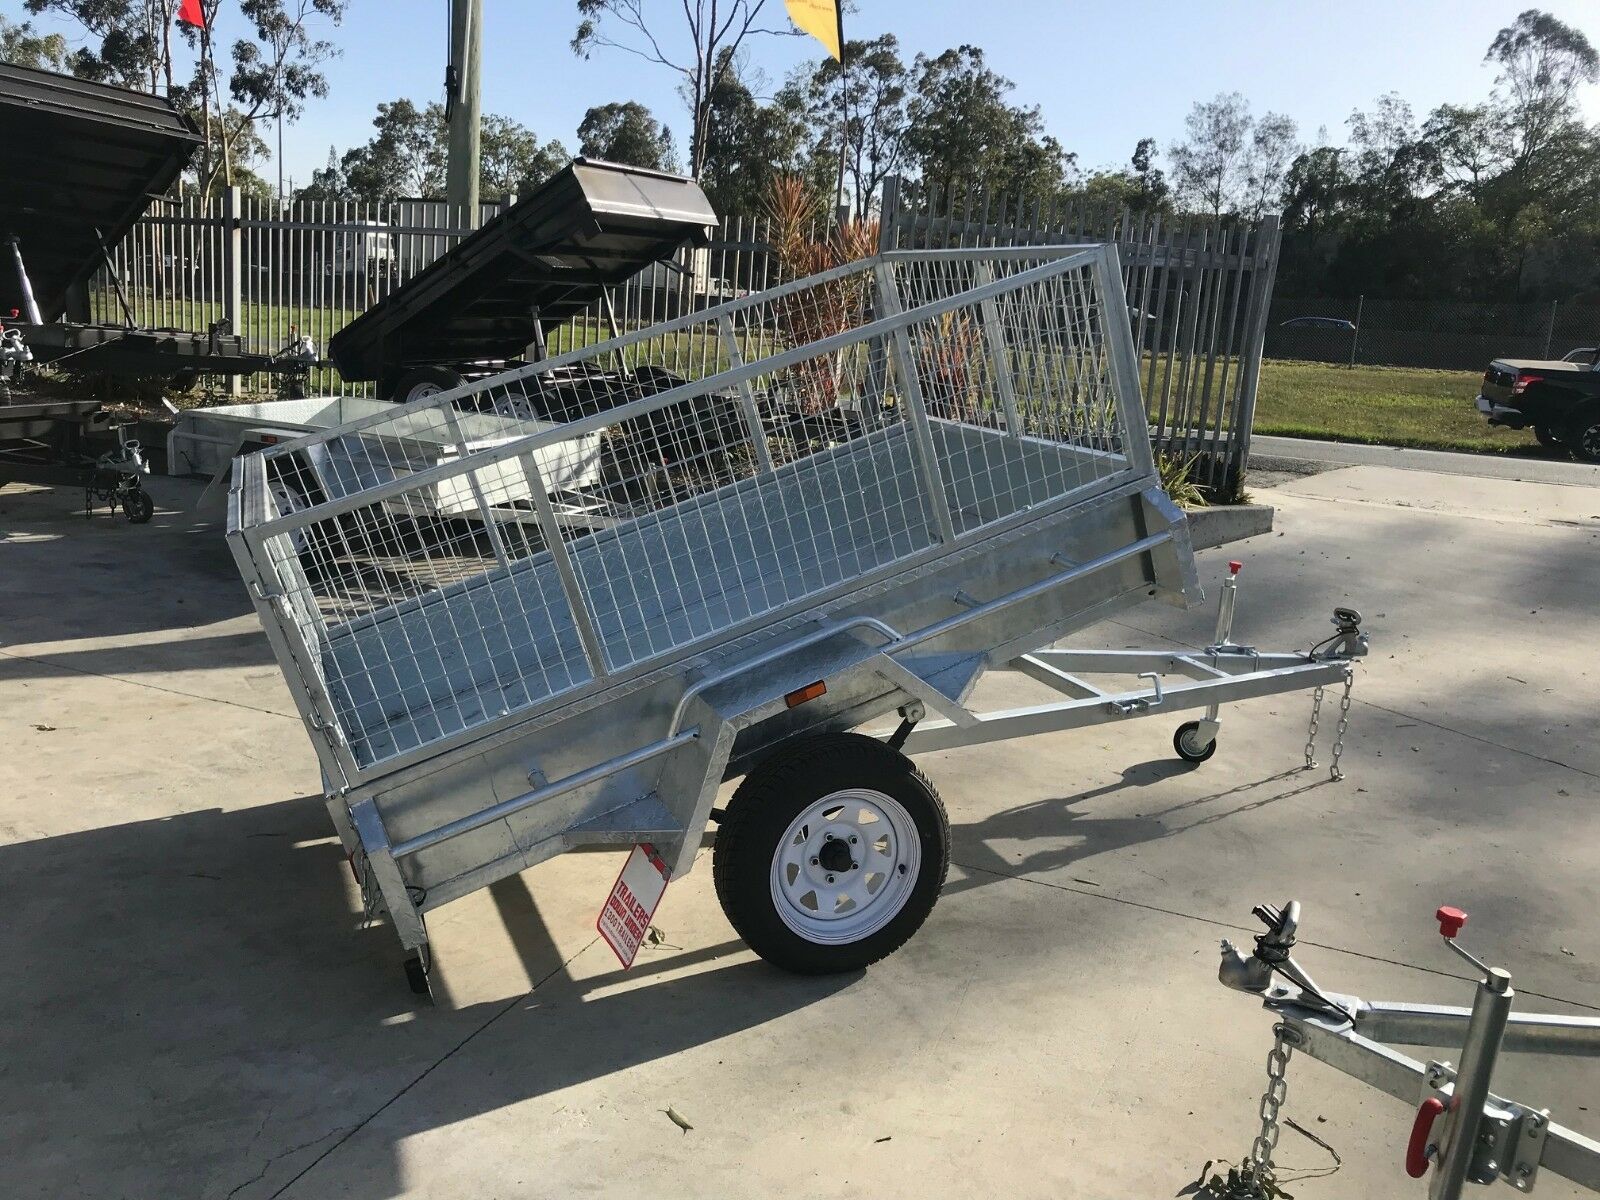 7×4 Heavy Duty Single Axle Galvanised Box Trailer with 3 Ft Cage for Sale in Brisbane<br><br><span class="galv-import">Imported Trailer</span>